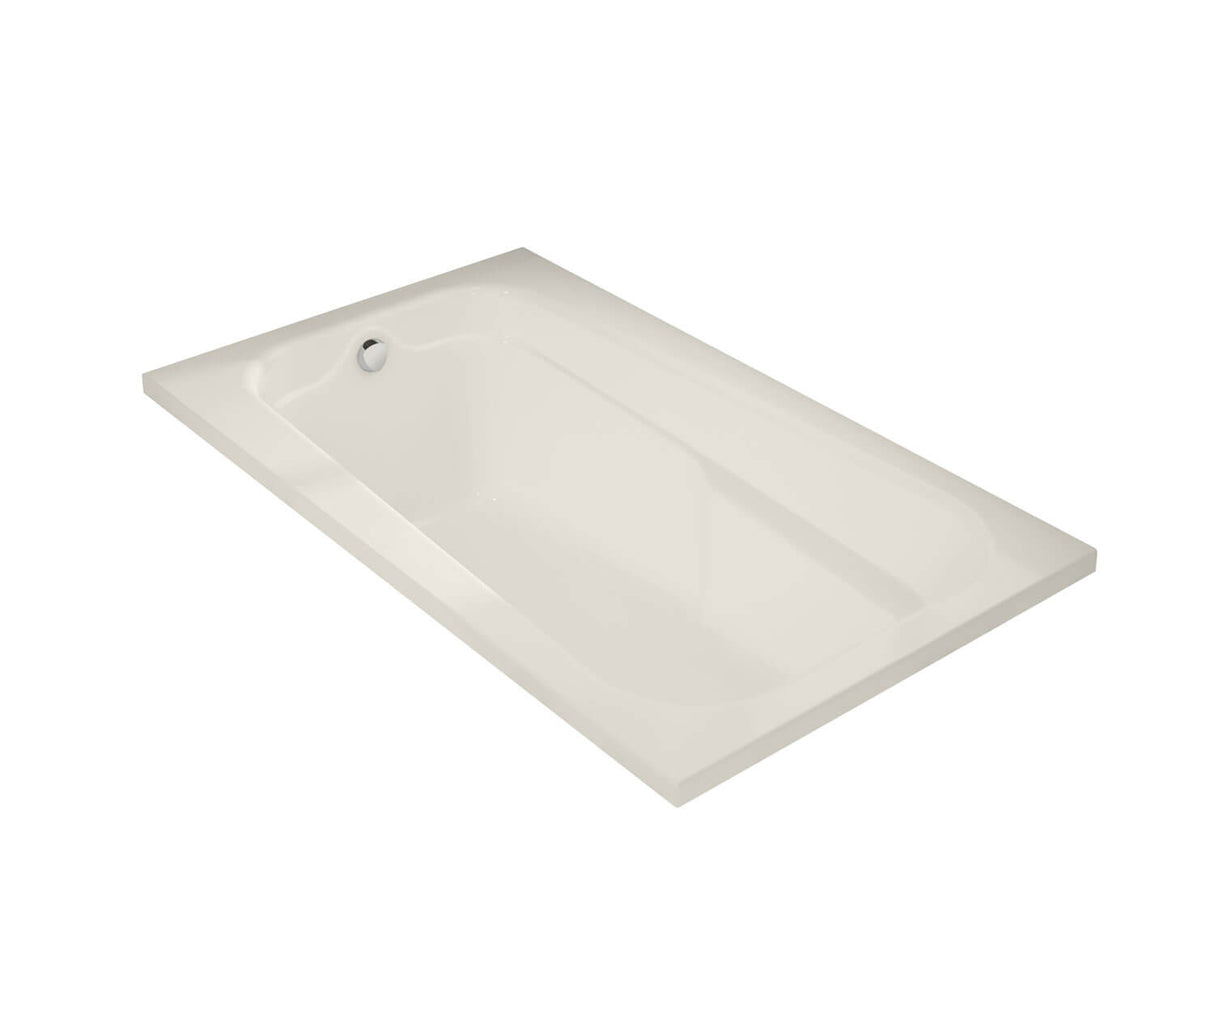 MAAX 100103-103-007 Tempest 60 x 36 Acrylic Alcove End Drain Aeroeffect Bathtub in Biscuit